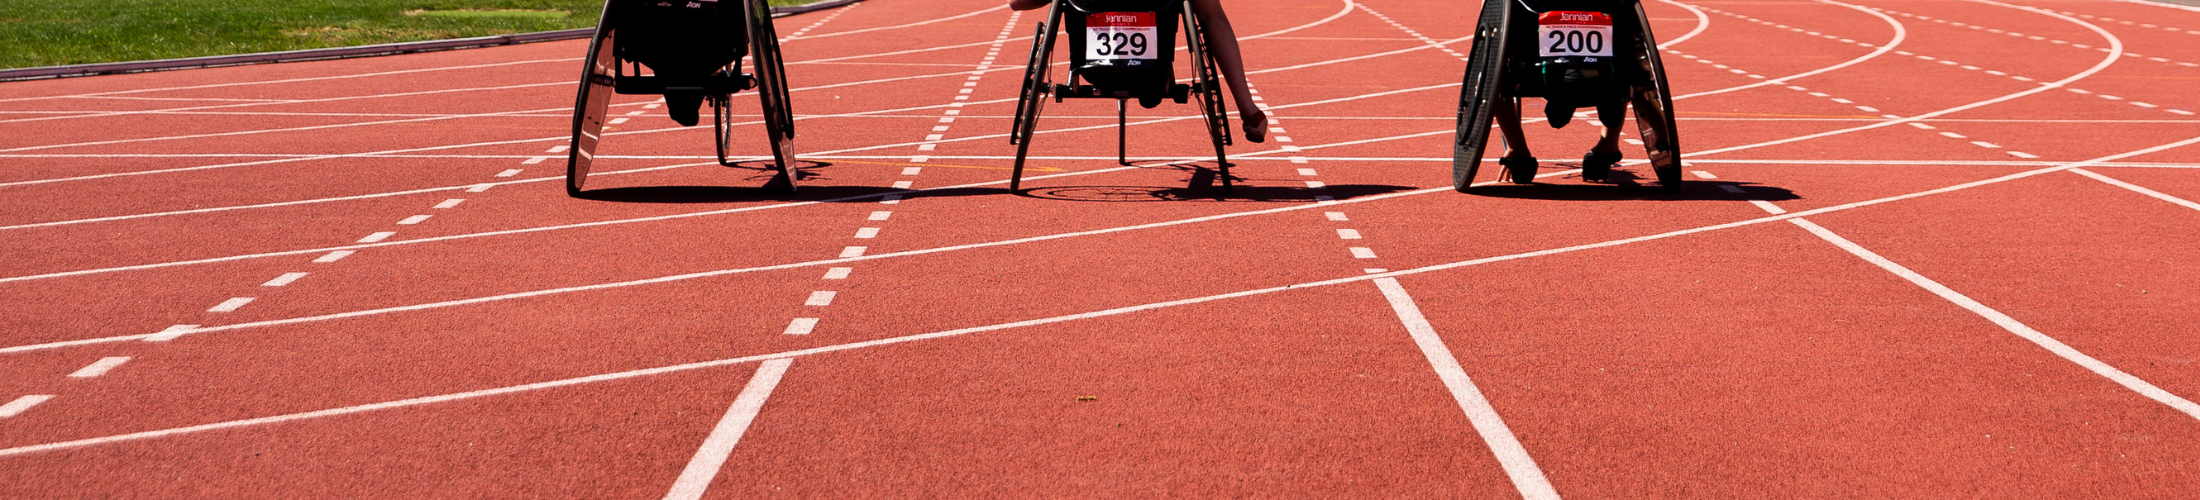 Three wheelchairs line up on an athletics track, ready to race.